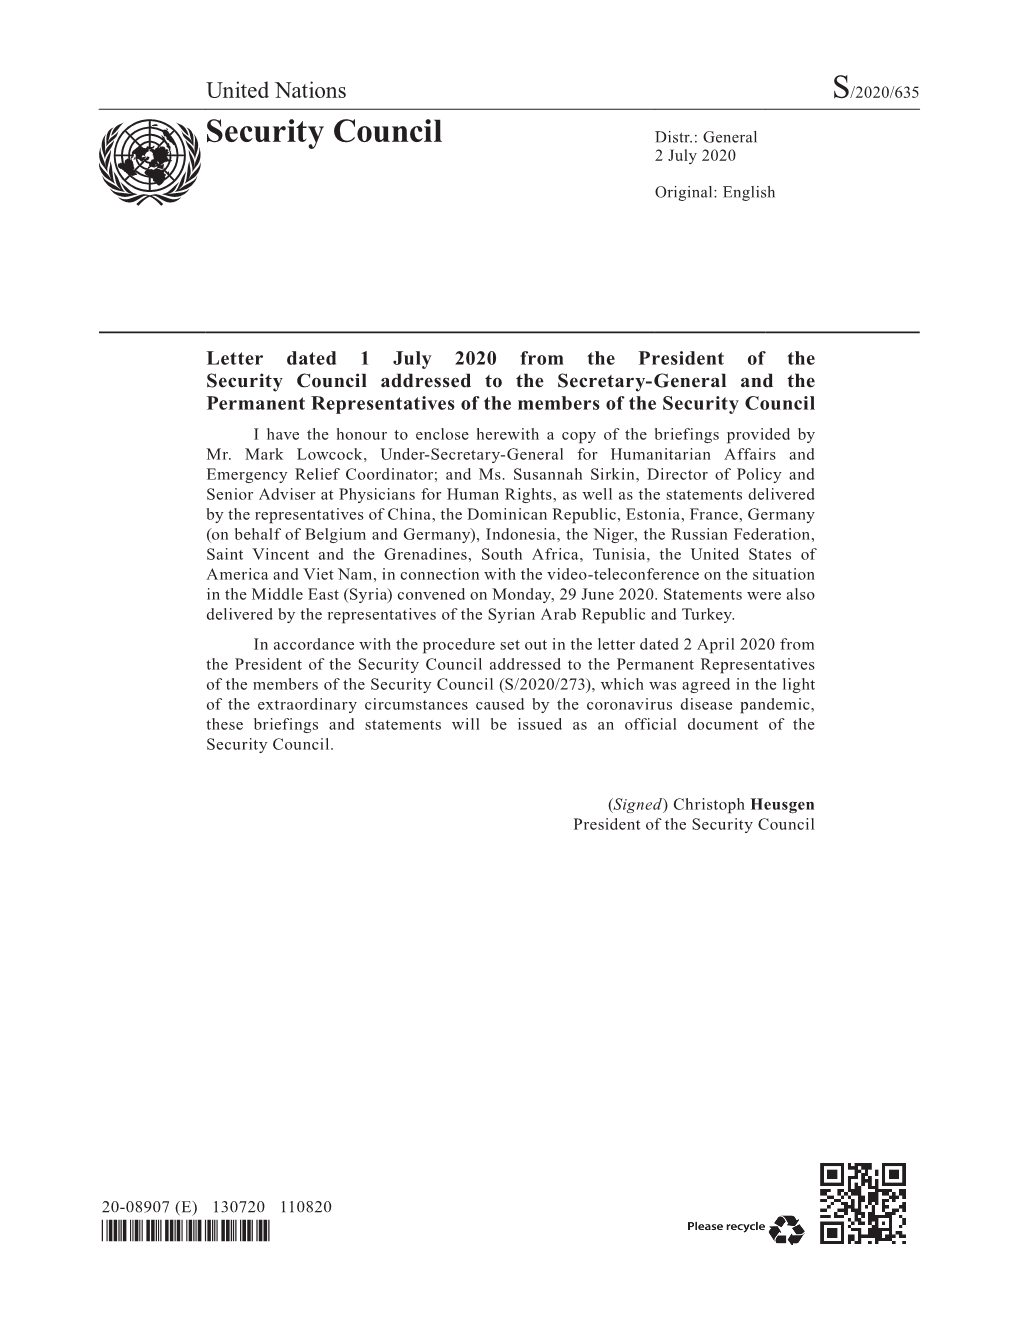 Letter Dated 1 July 2020 from the President of the Security Council